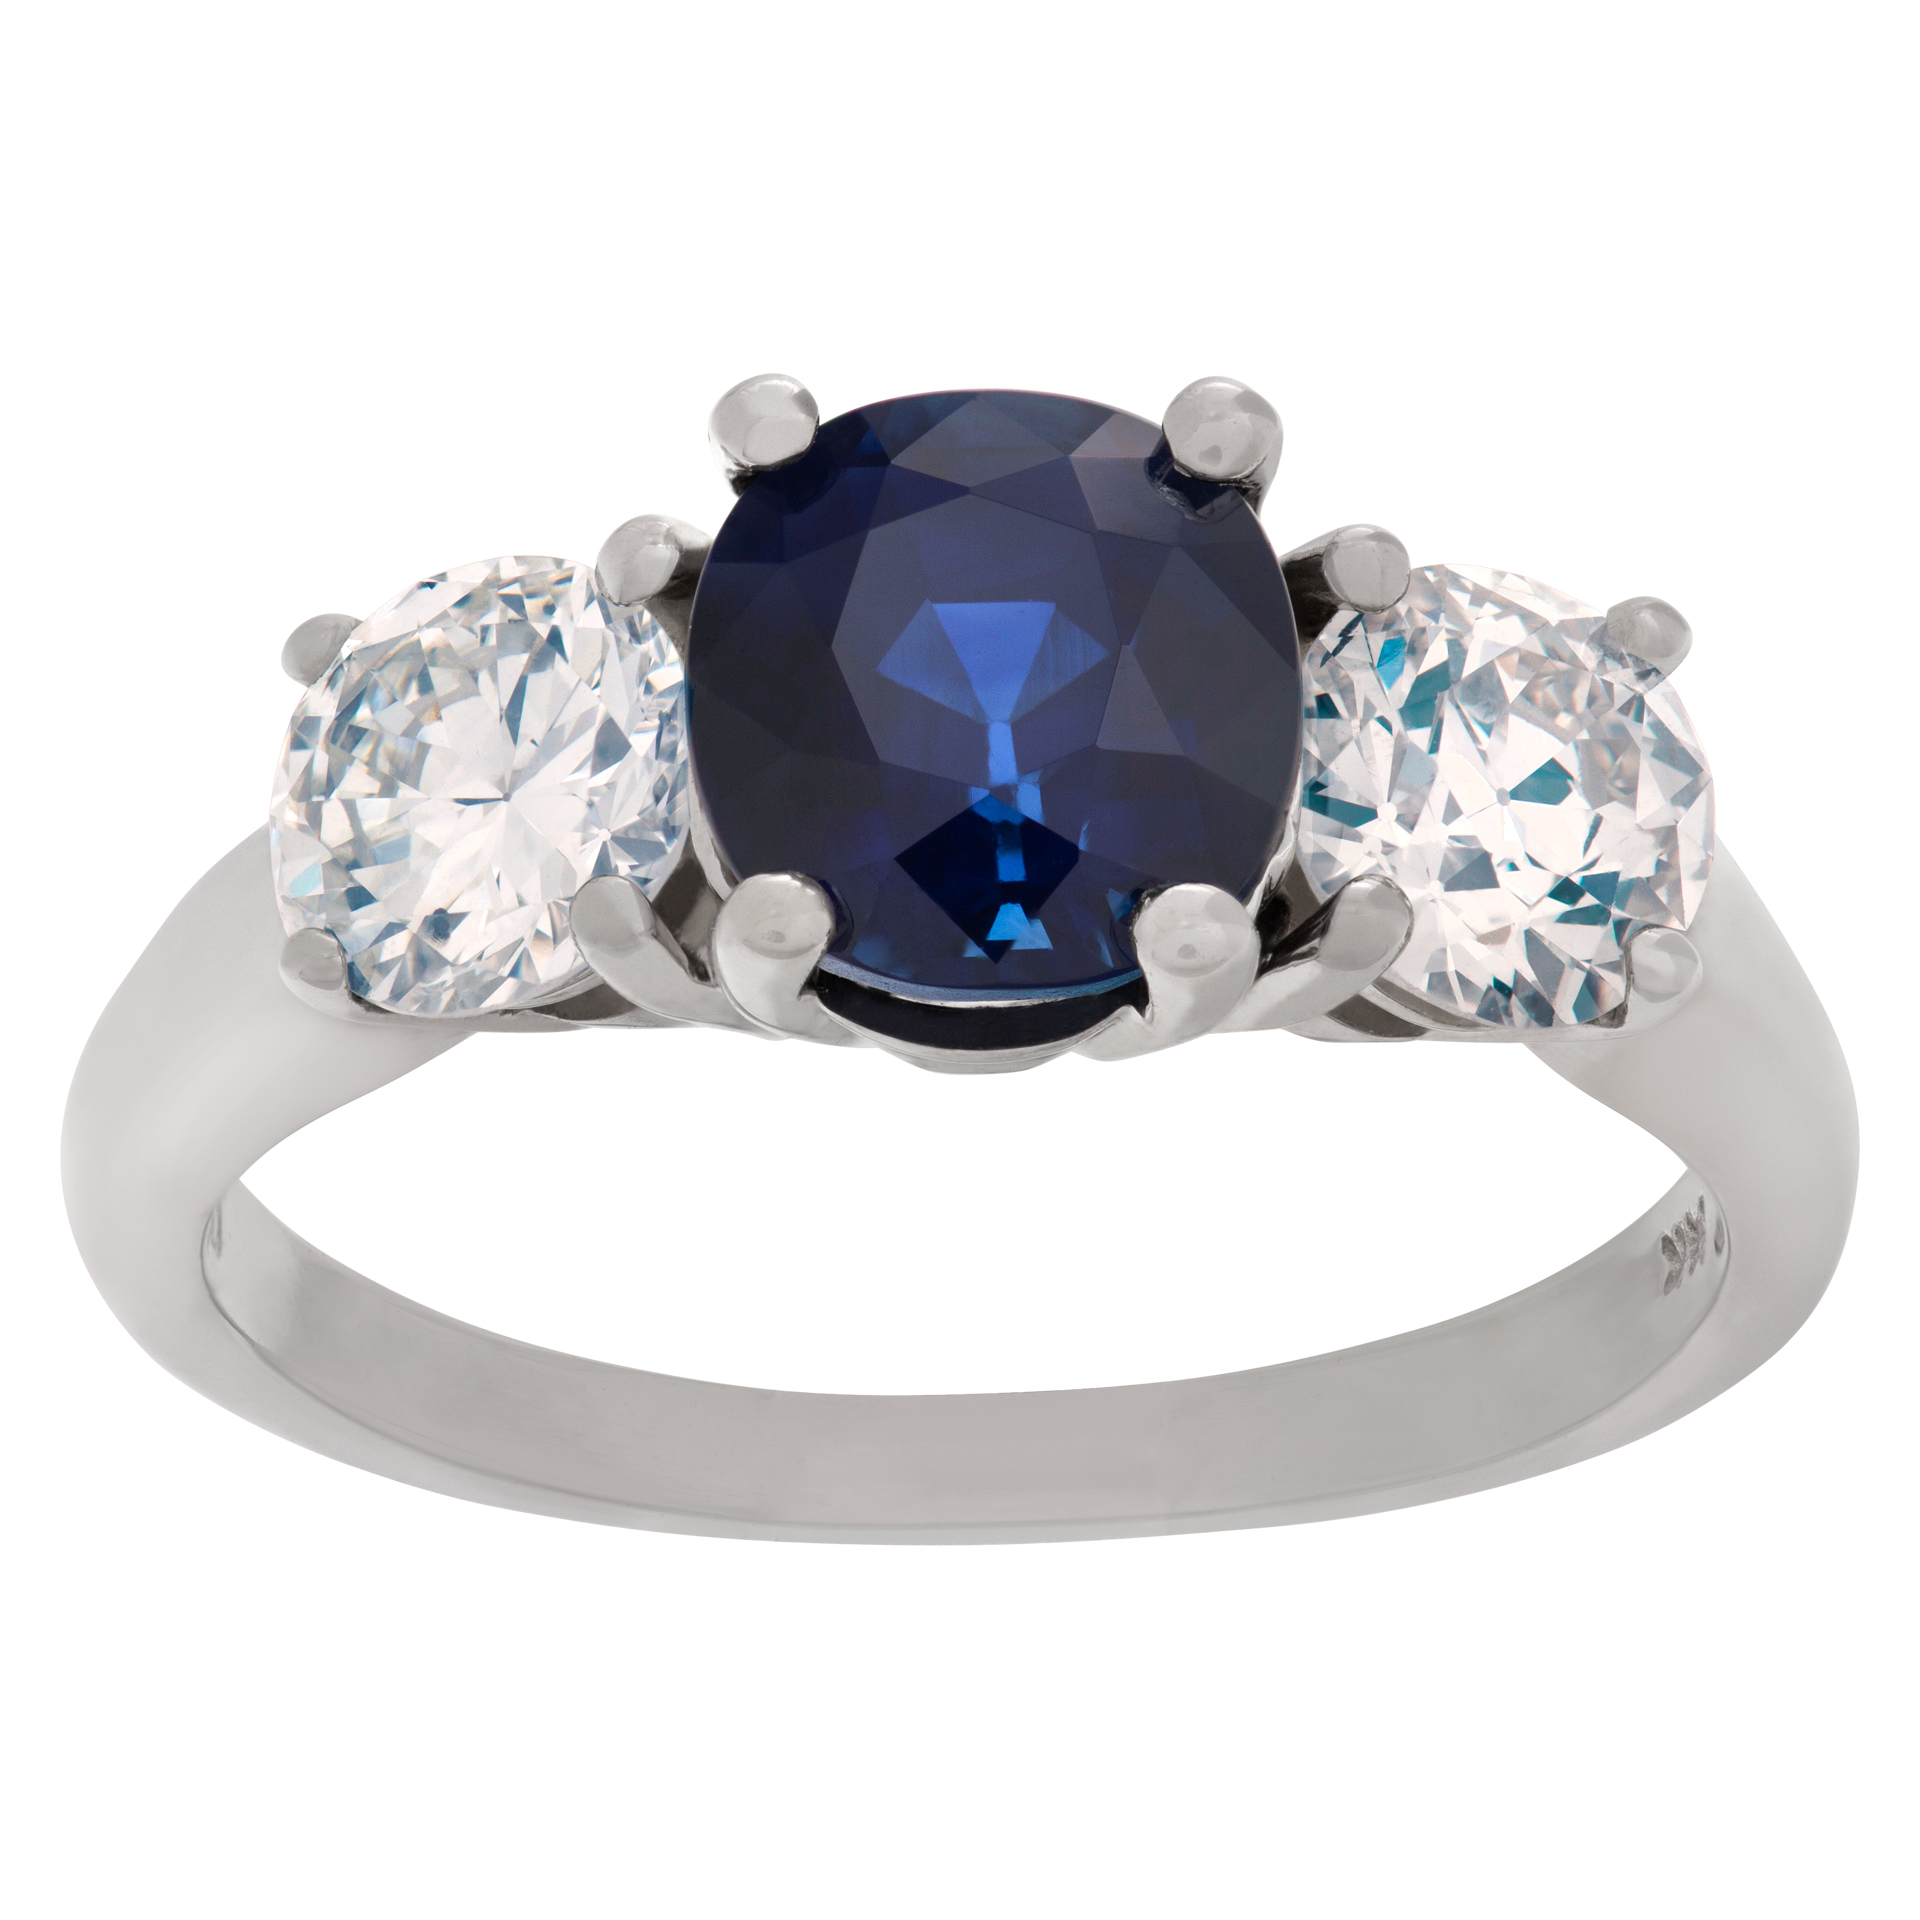 Sapphire & diamond ring in 14k white gold. 1.92 ct AGL certified unheated sapphire.